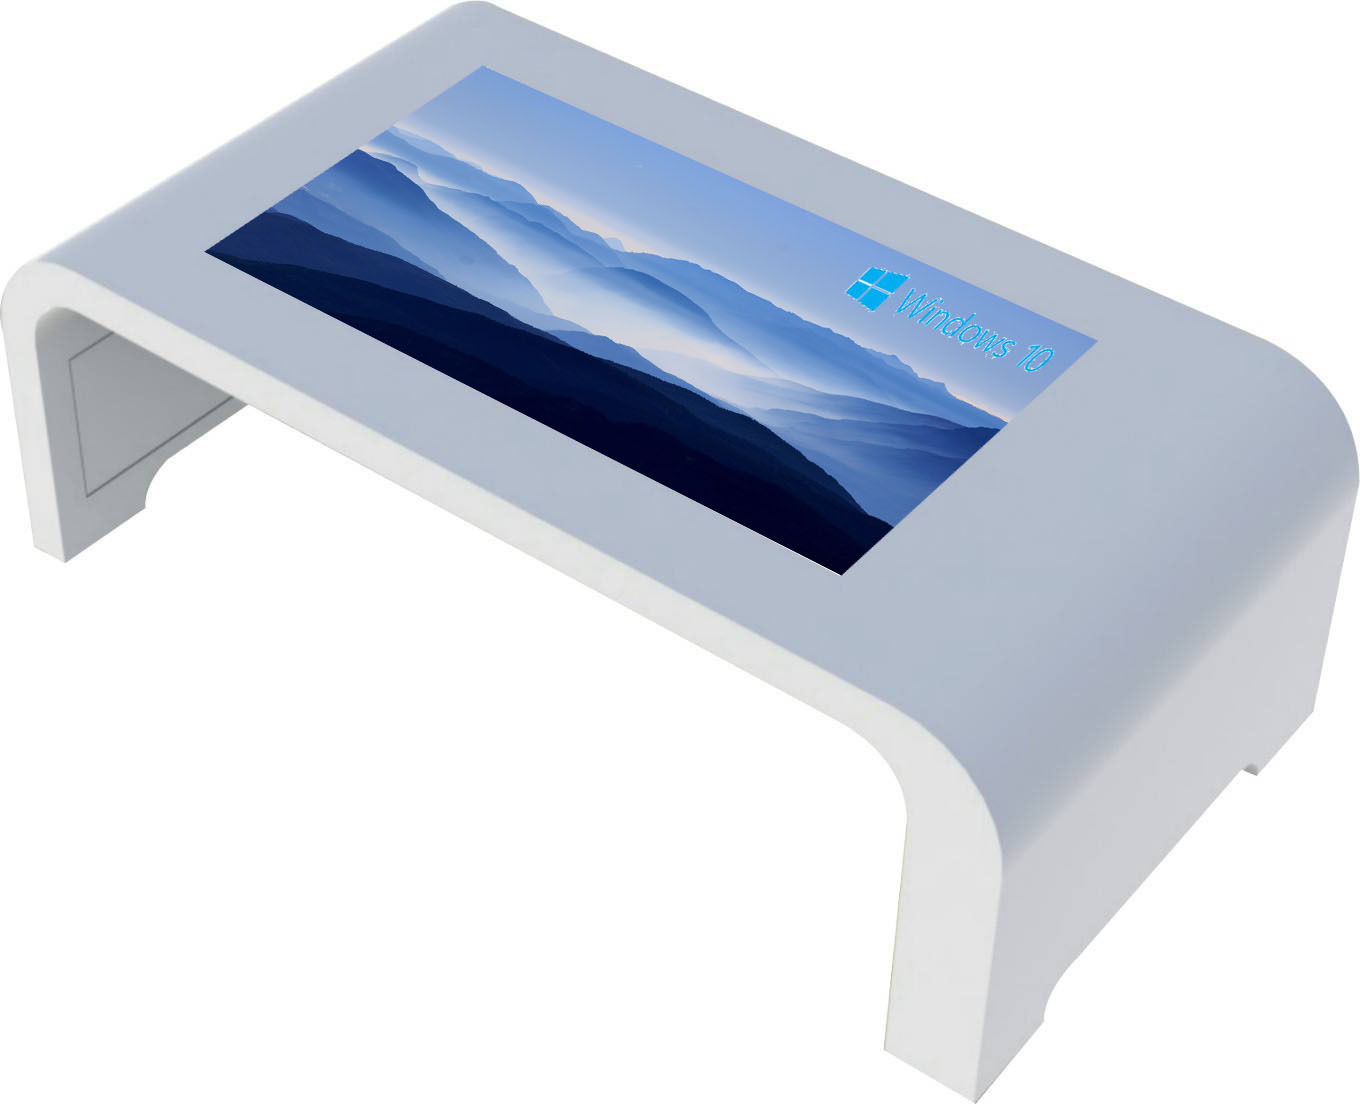 multitouch tables